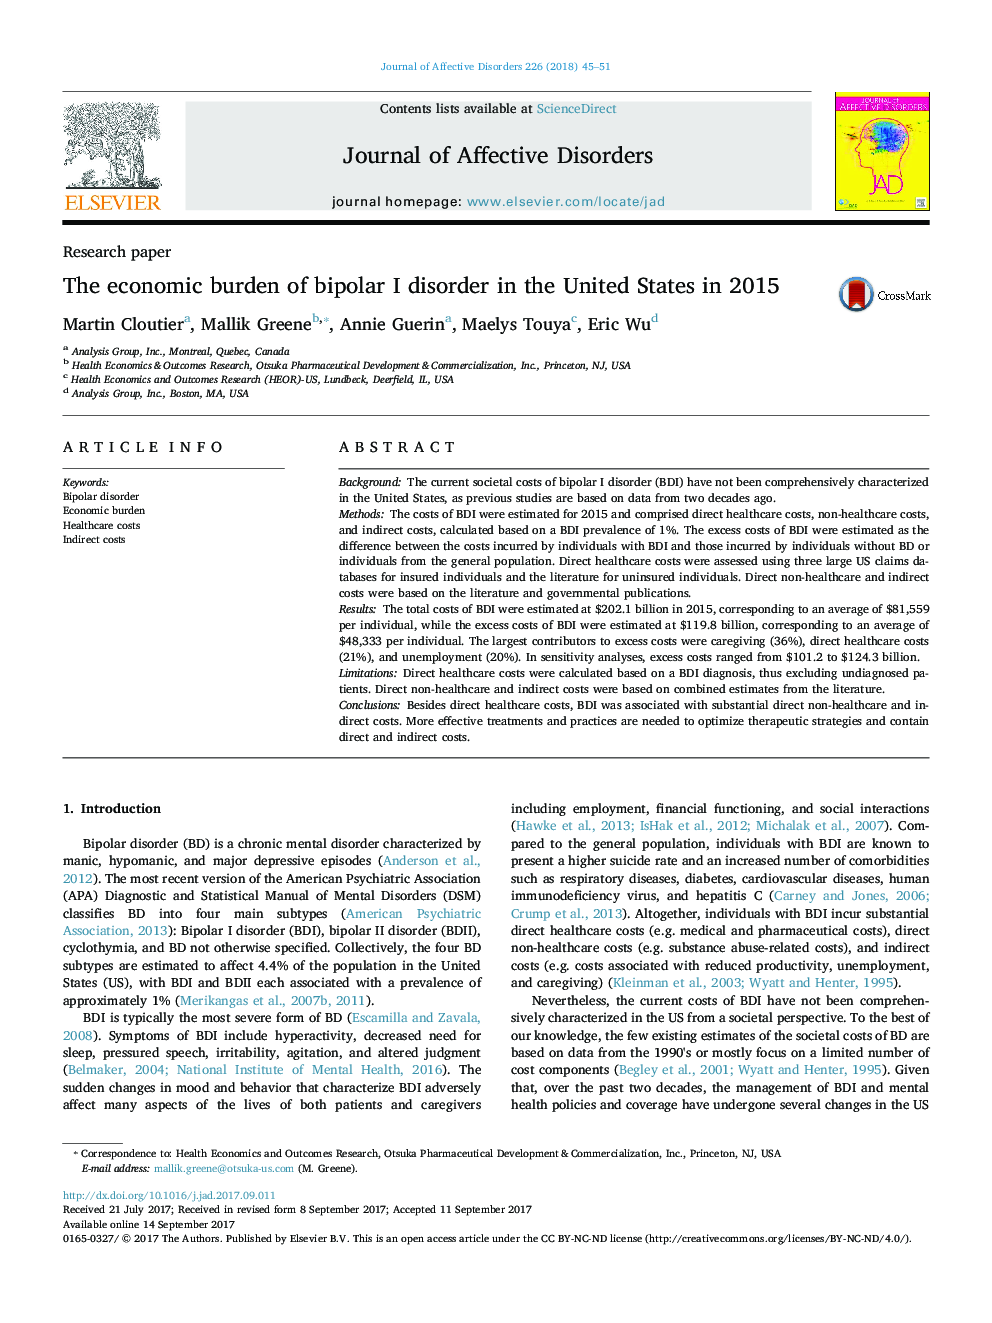 Research paperThe economic burden of bipolar I disorder in the United States in 2015